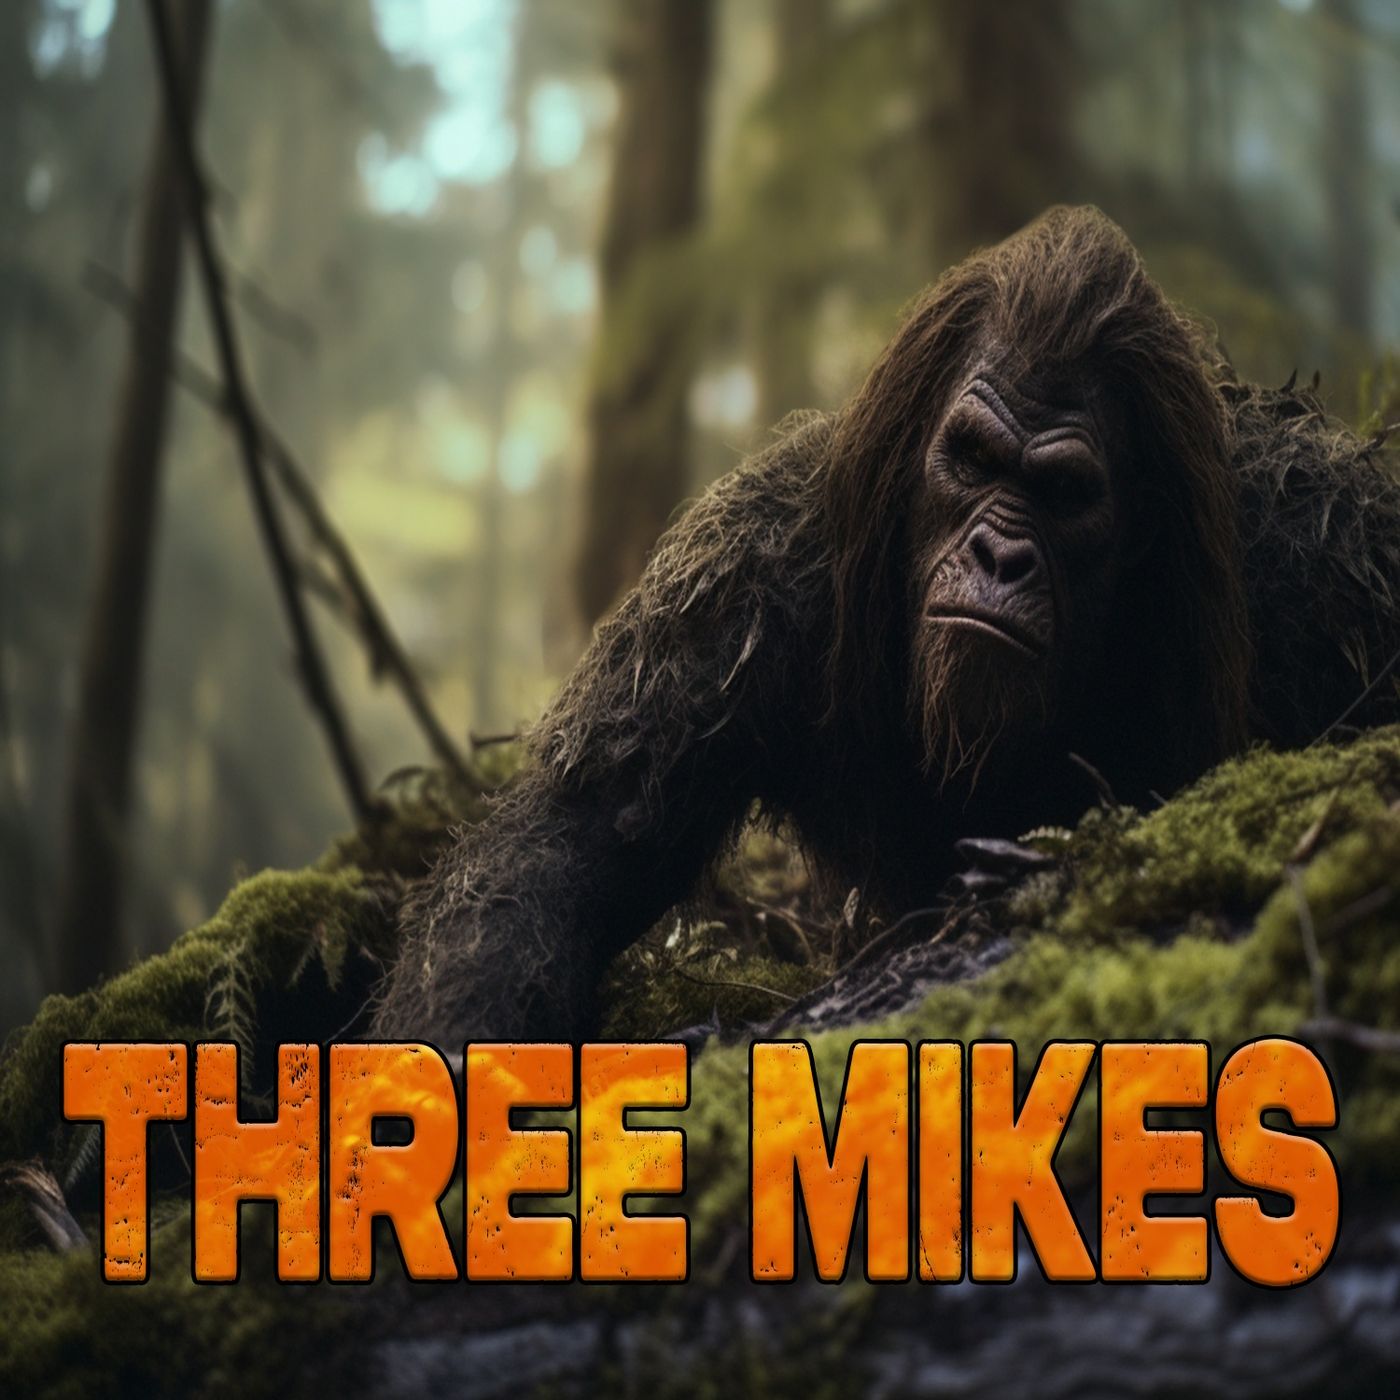 A Bigfoot Called, 3-Mikes